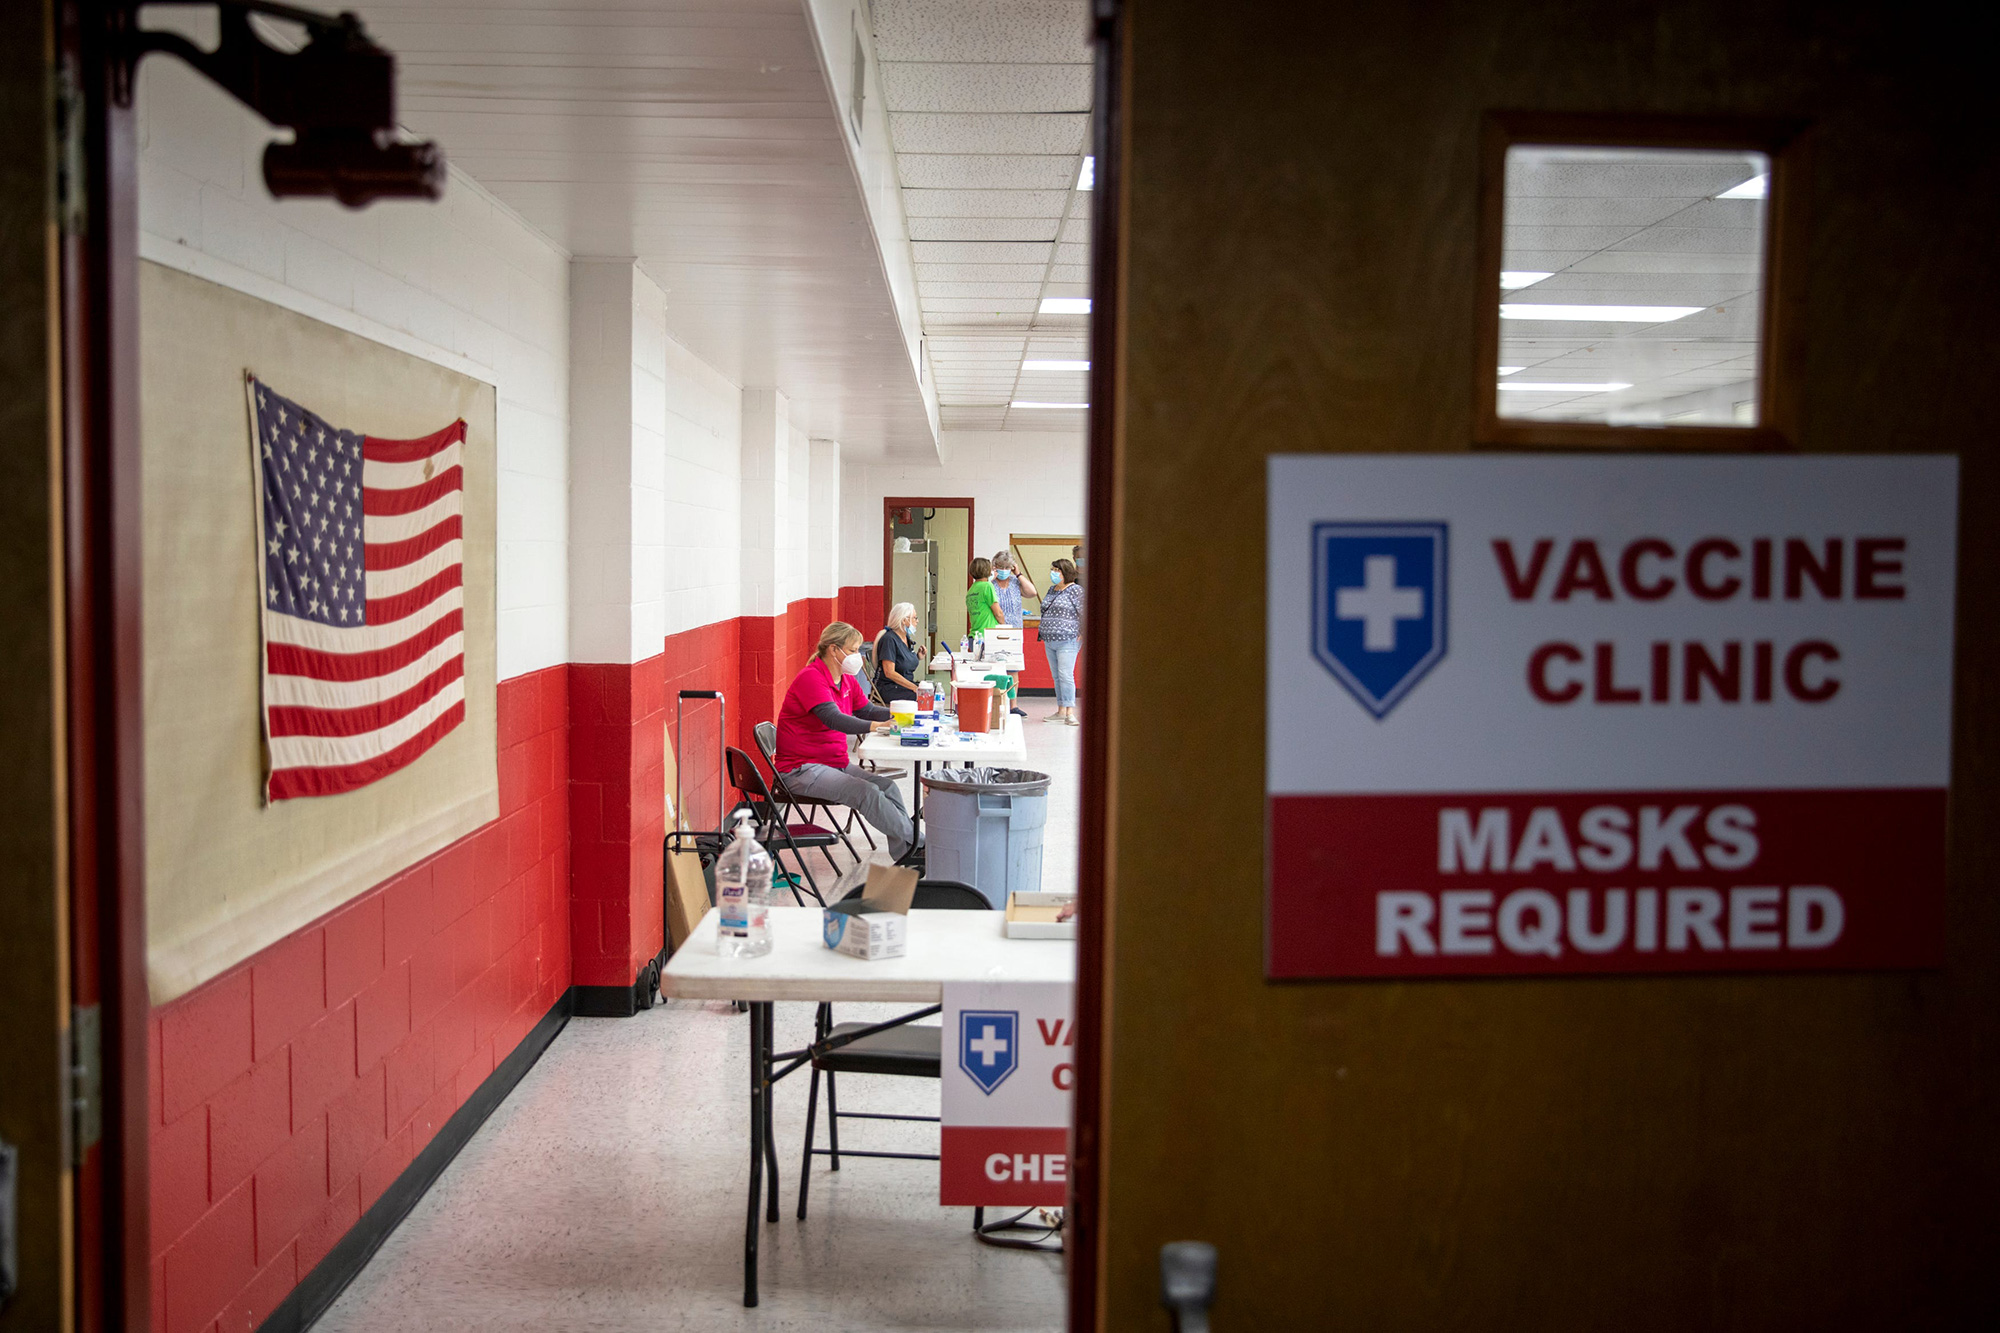 Deb Tibbetts, a registered nurse with the Franklin County Health Department, waits for patients at the temporary vaccination clinic at the Laurel Community Center near Cincinnati, Ohio, on Monday, June 7.